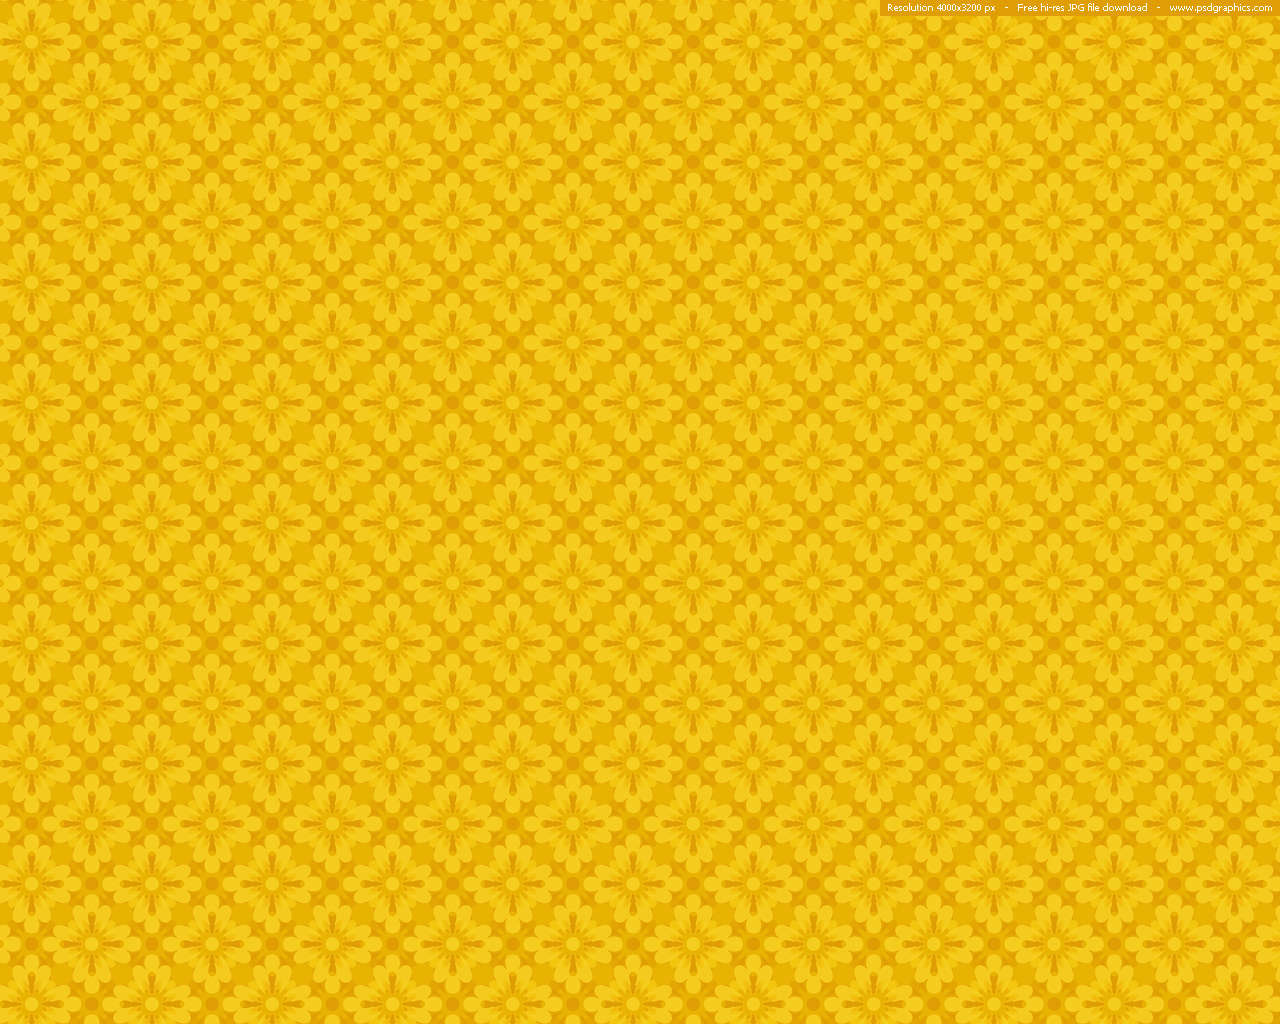 Yellow Backgrounds Image - Wallpaper Cave